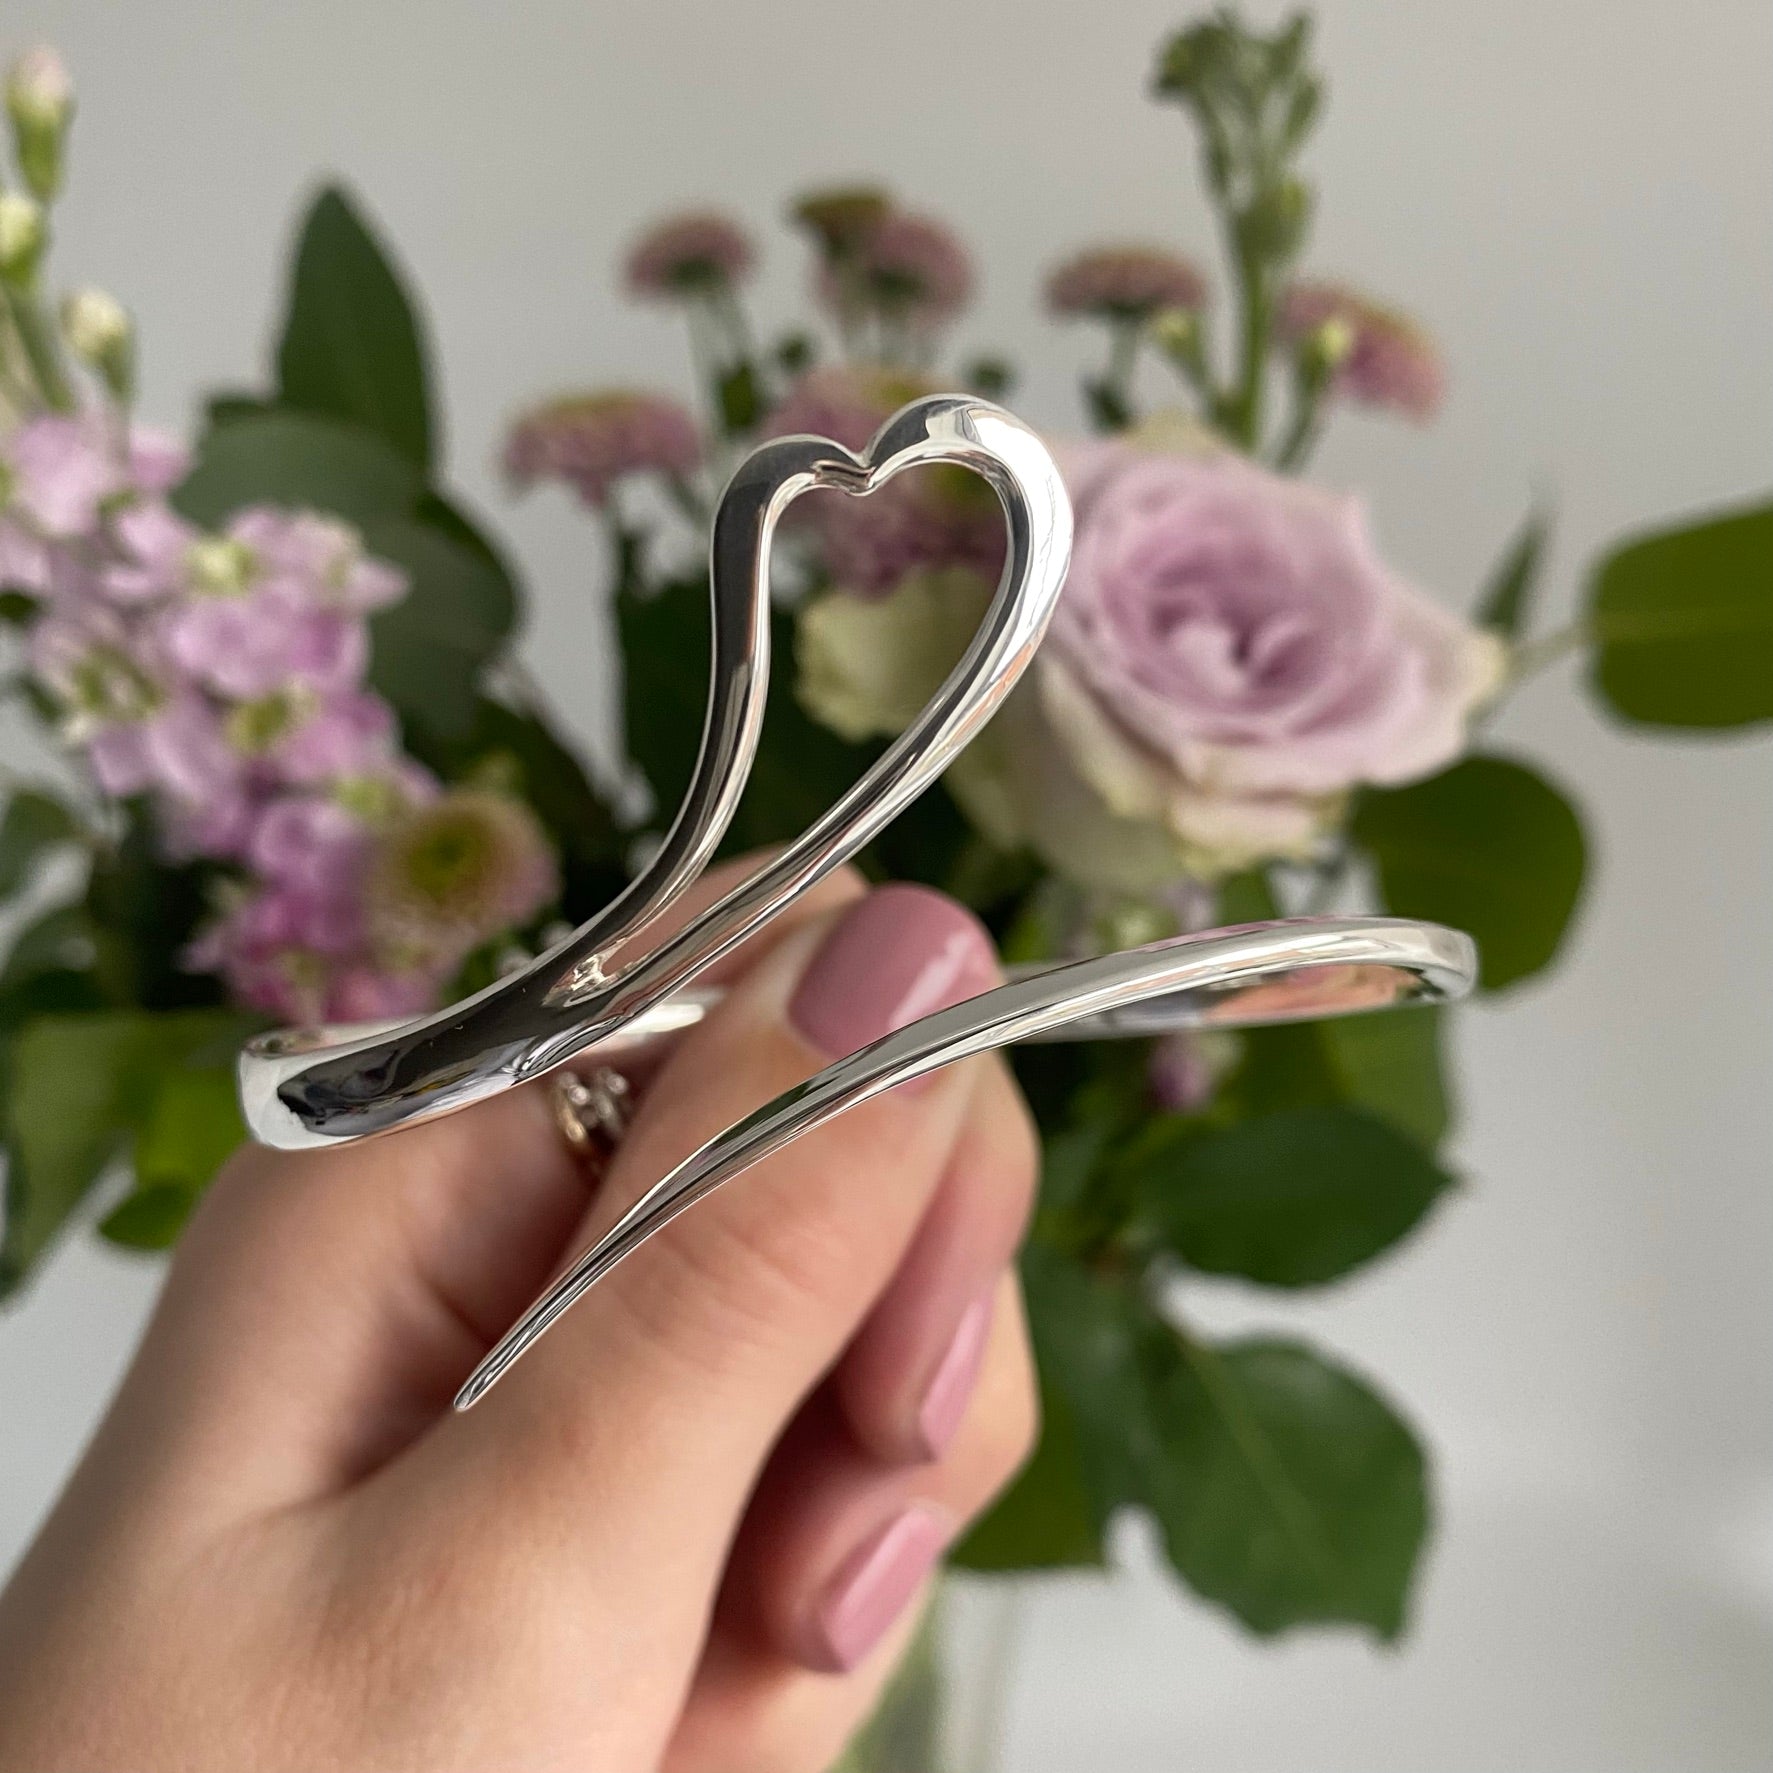 Sterling Silver Zoe Shaped Heart Bangle With a Sweeping Tail Across The Front Of The Bangle